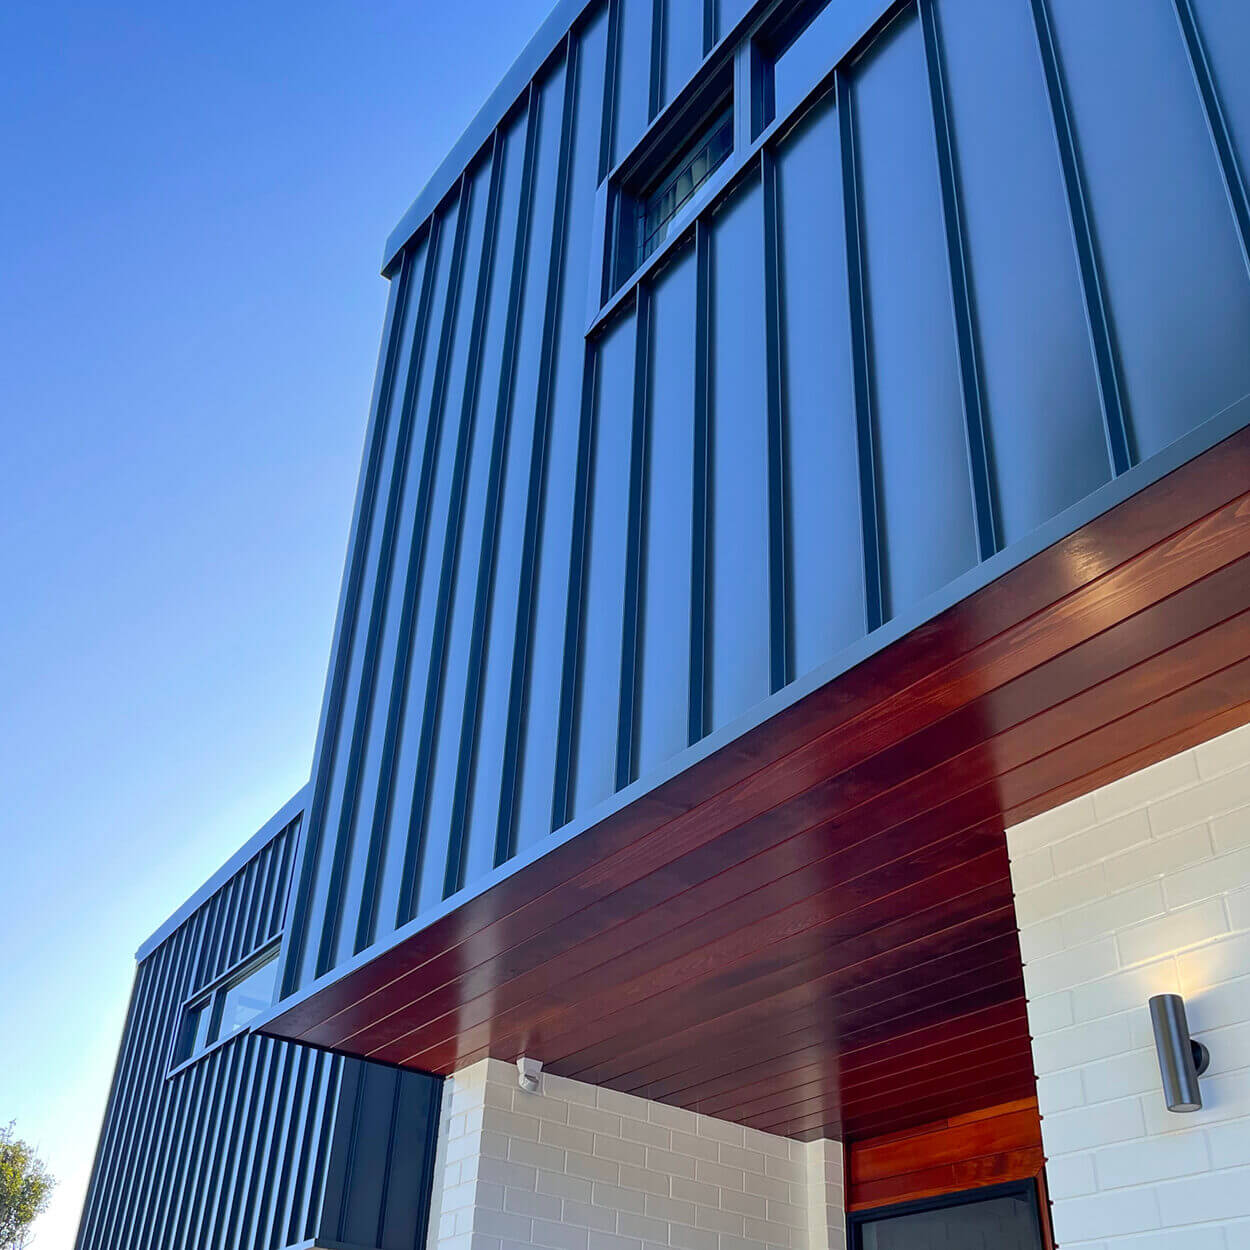 A modern architectural building corner view featuring dark blue vertical metal panels, a contrasting strip of warm-toned wood siding, and a section of white bricks, under a clear blue sky in Nelson Bay.